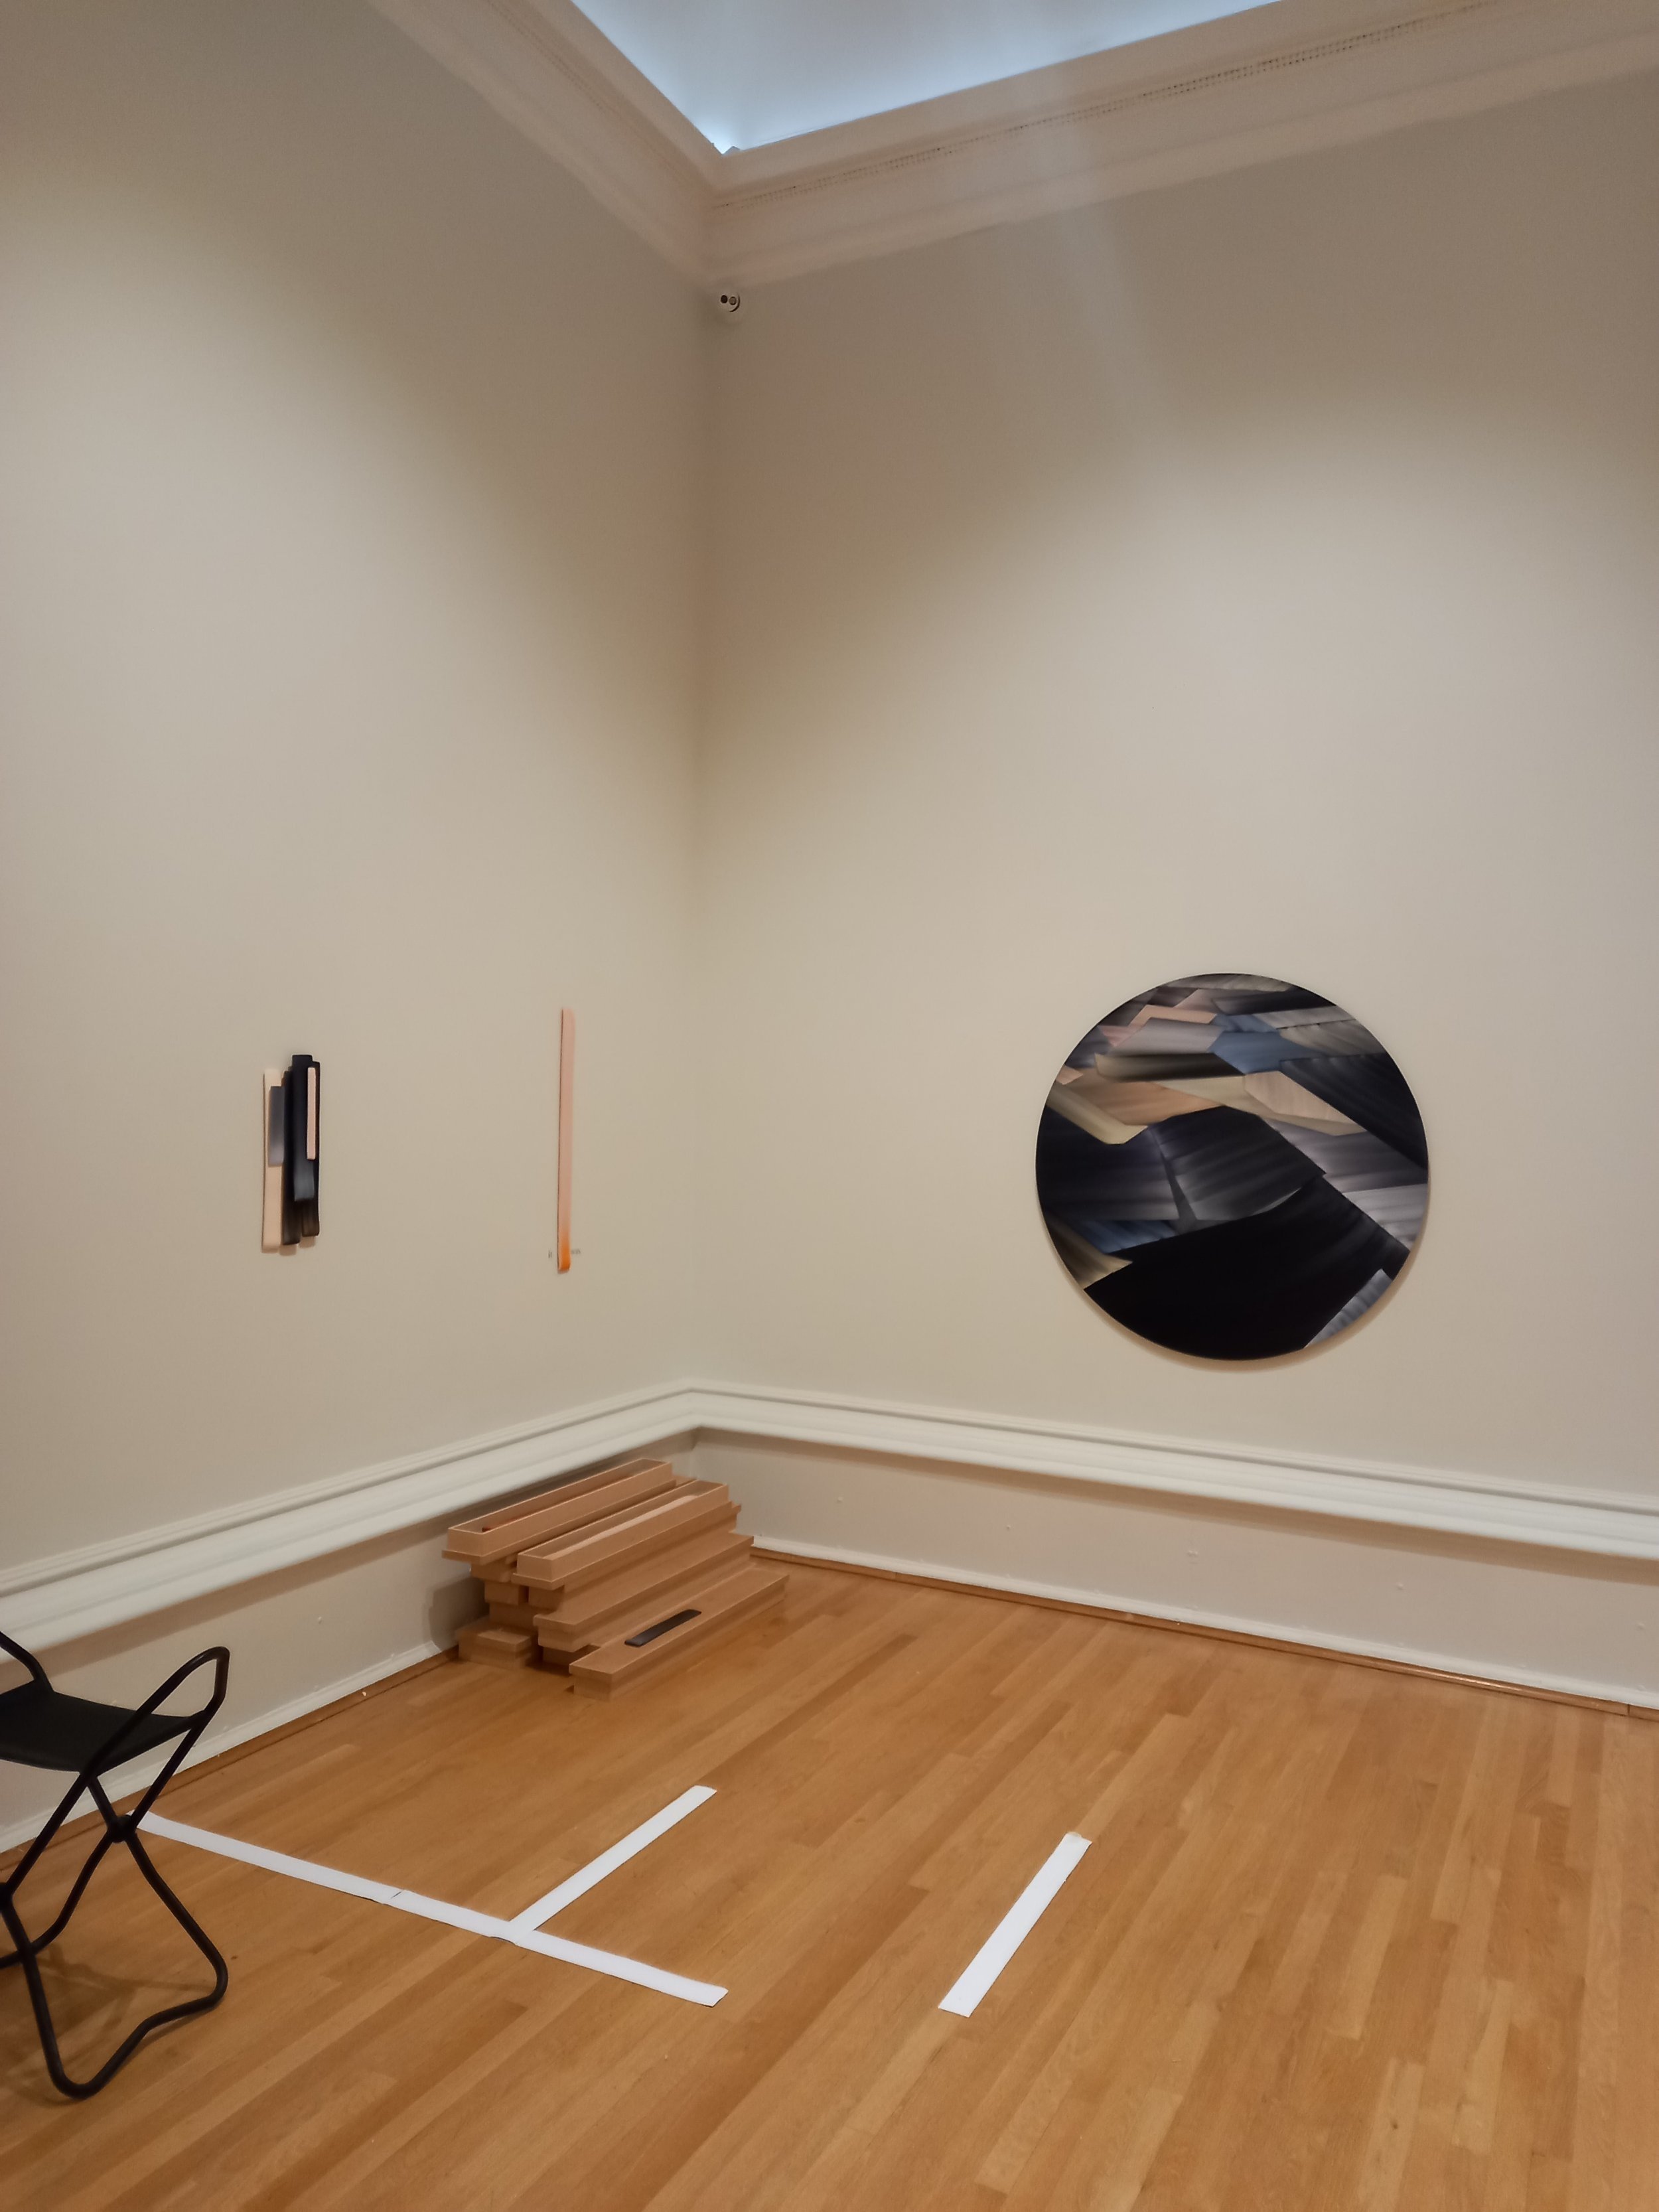 M. B. O’Toole, Refractive Pool, painting installation, Walker Art Gallery, Liverpool 2022.